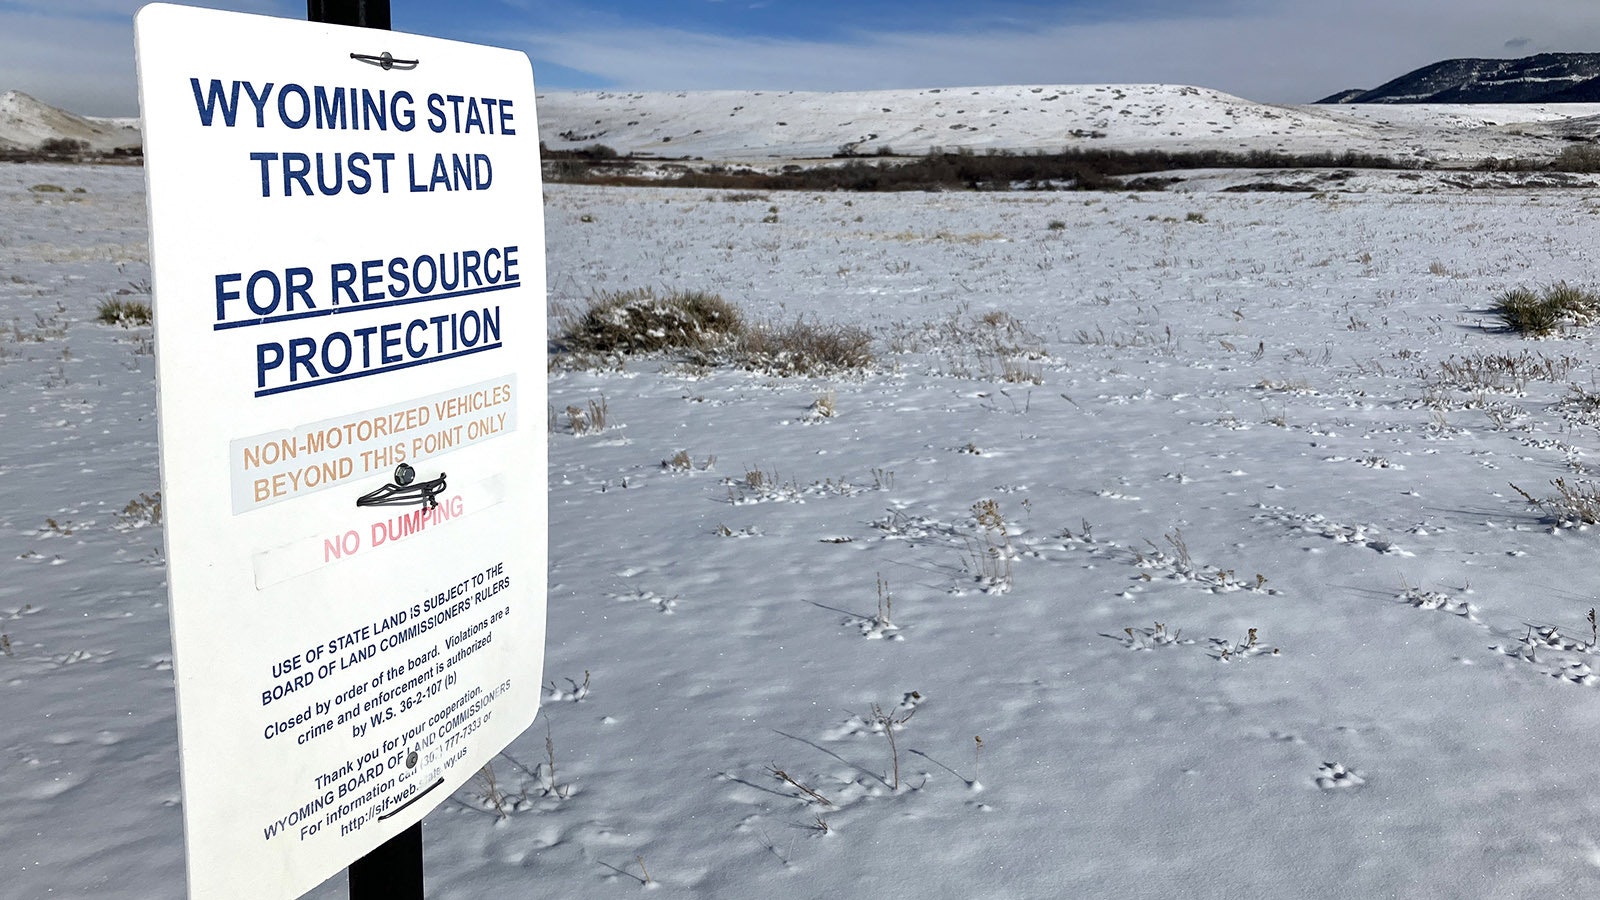 Land set aside for non-motorized use is being considered for a gravel mining operation at the base of Casper Mountain. Residents adjacent to the mine are raising opposition.